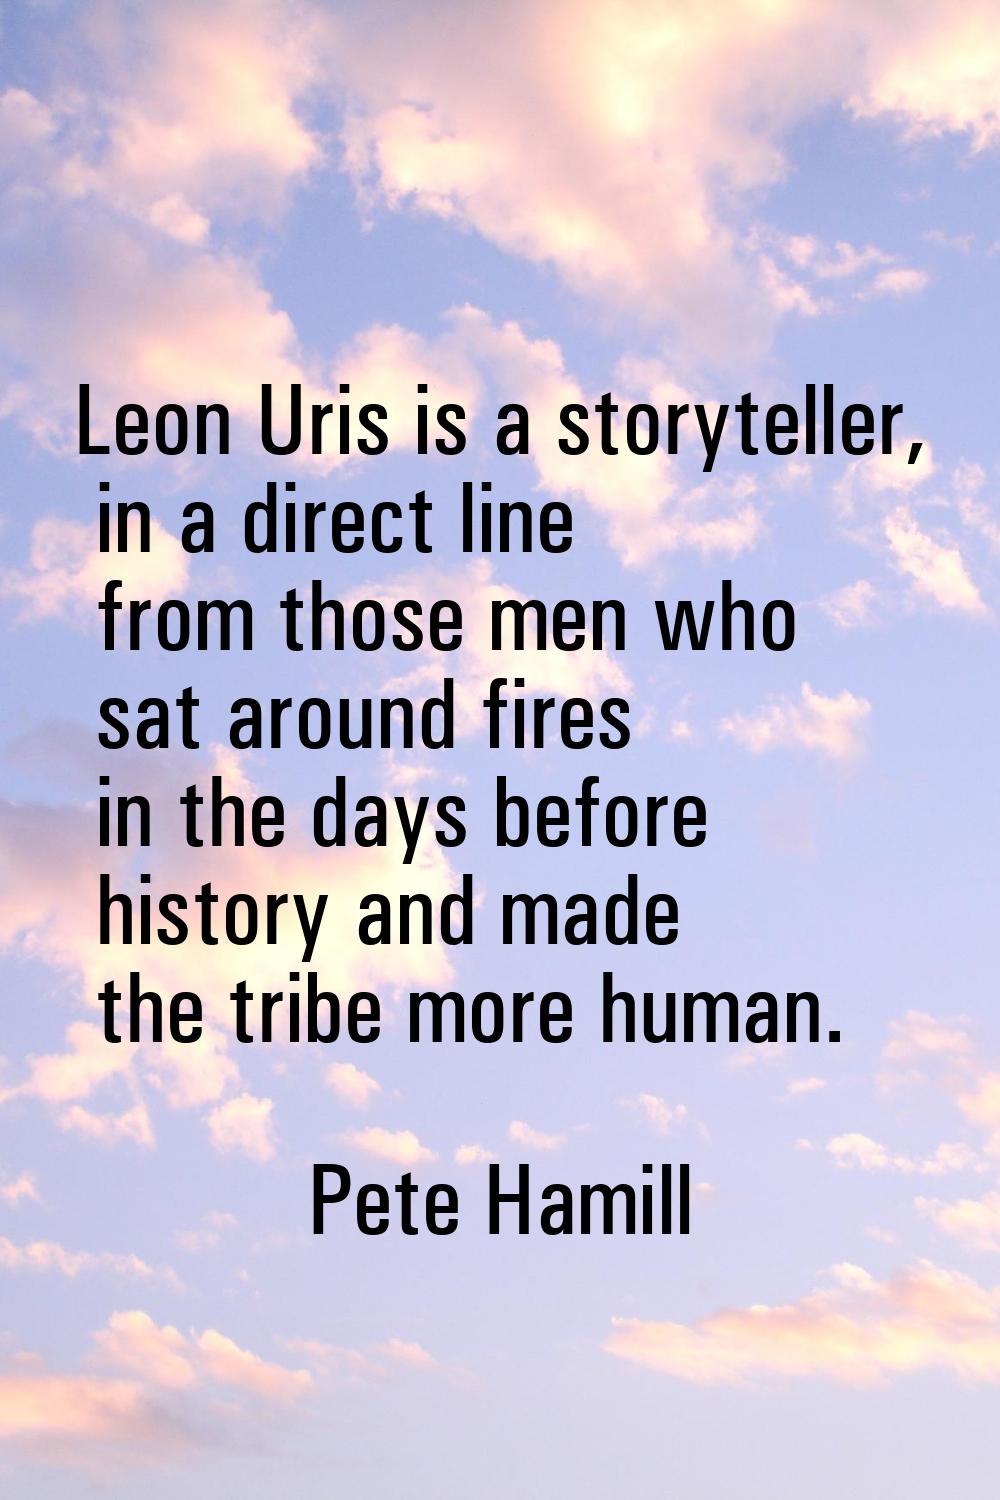 Leon Uris is a storyteller, in a direct line from those men who sat around fires in the days before